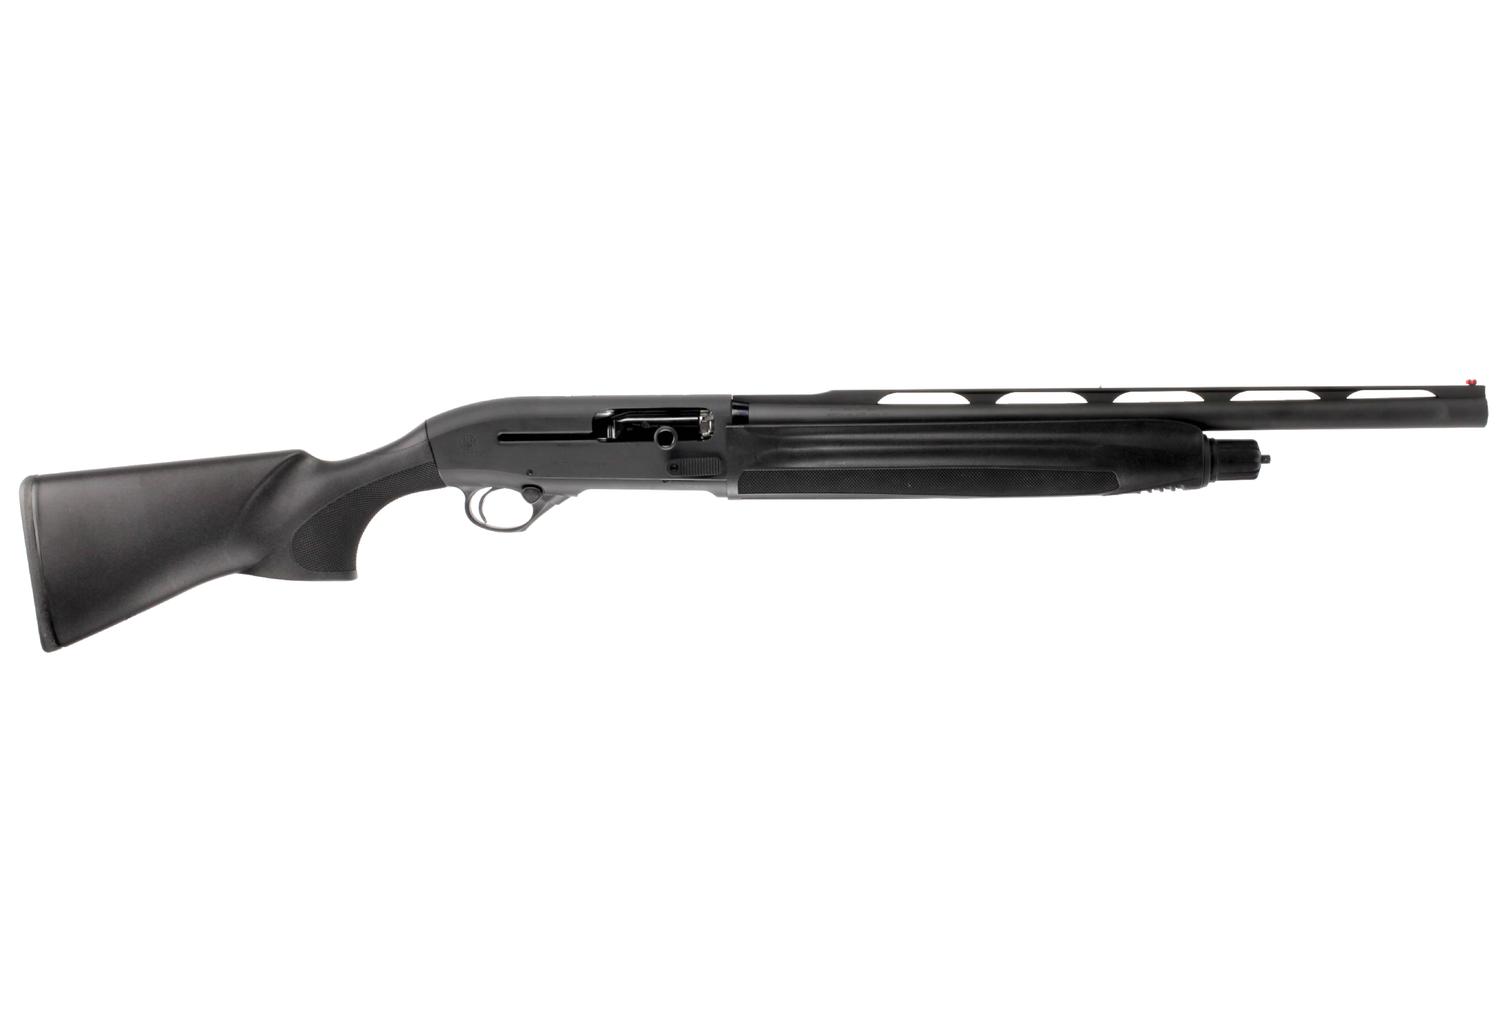  1301 Competition 12ga 21in - Black